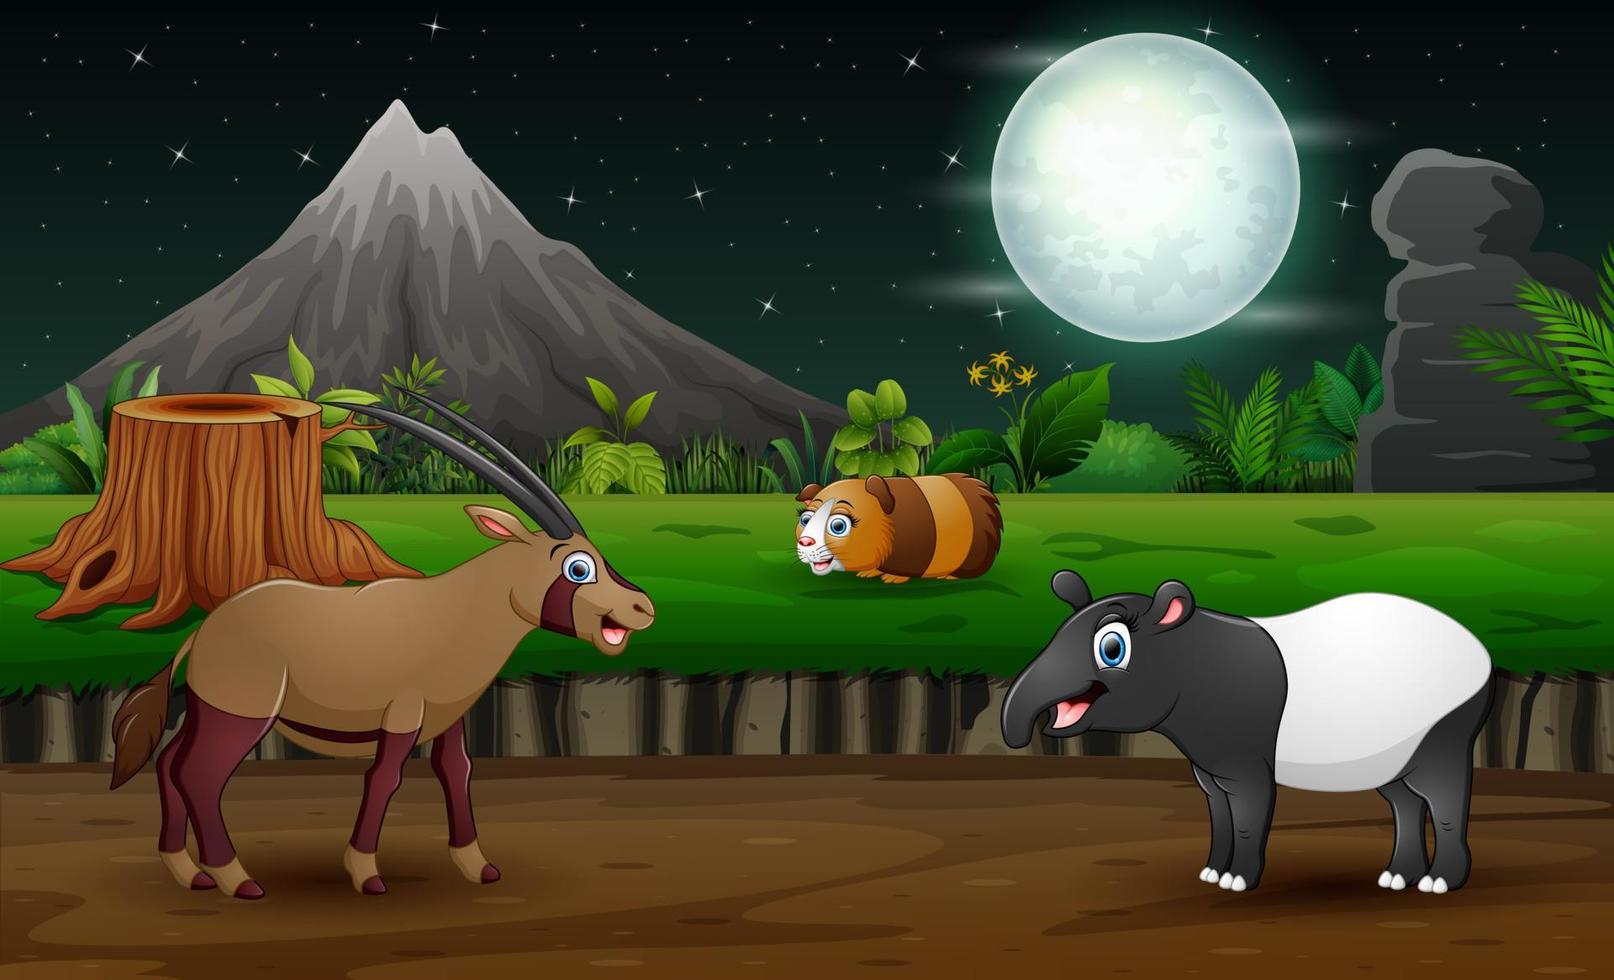 Cartoon wild animals playing in the night landscape vector